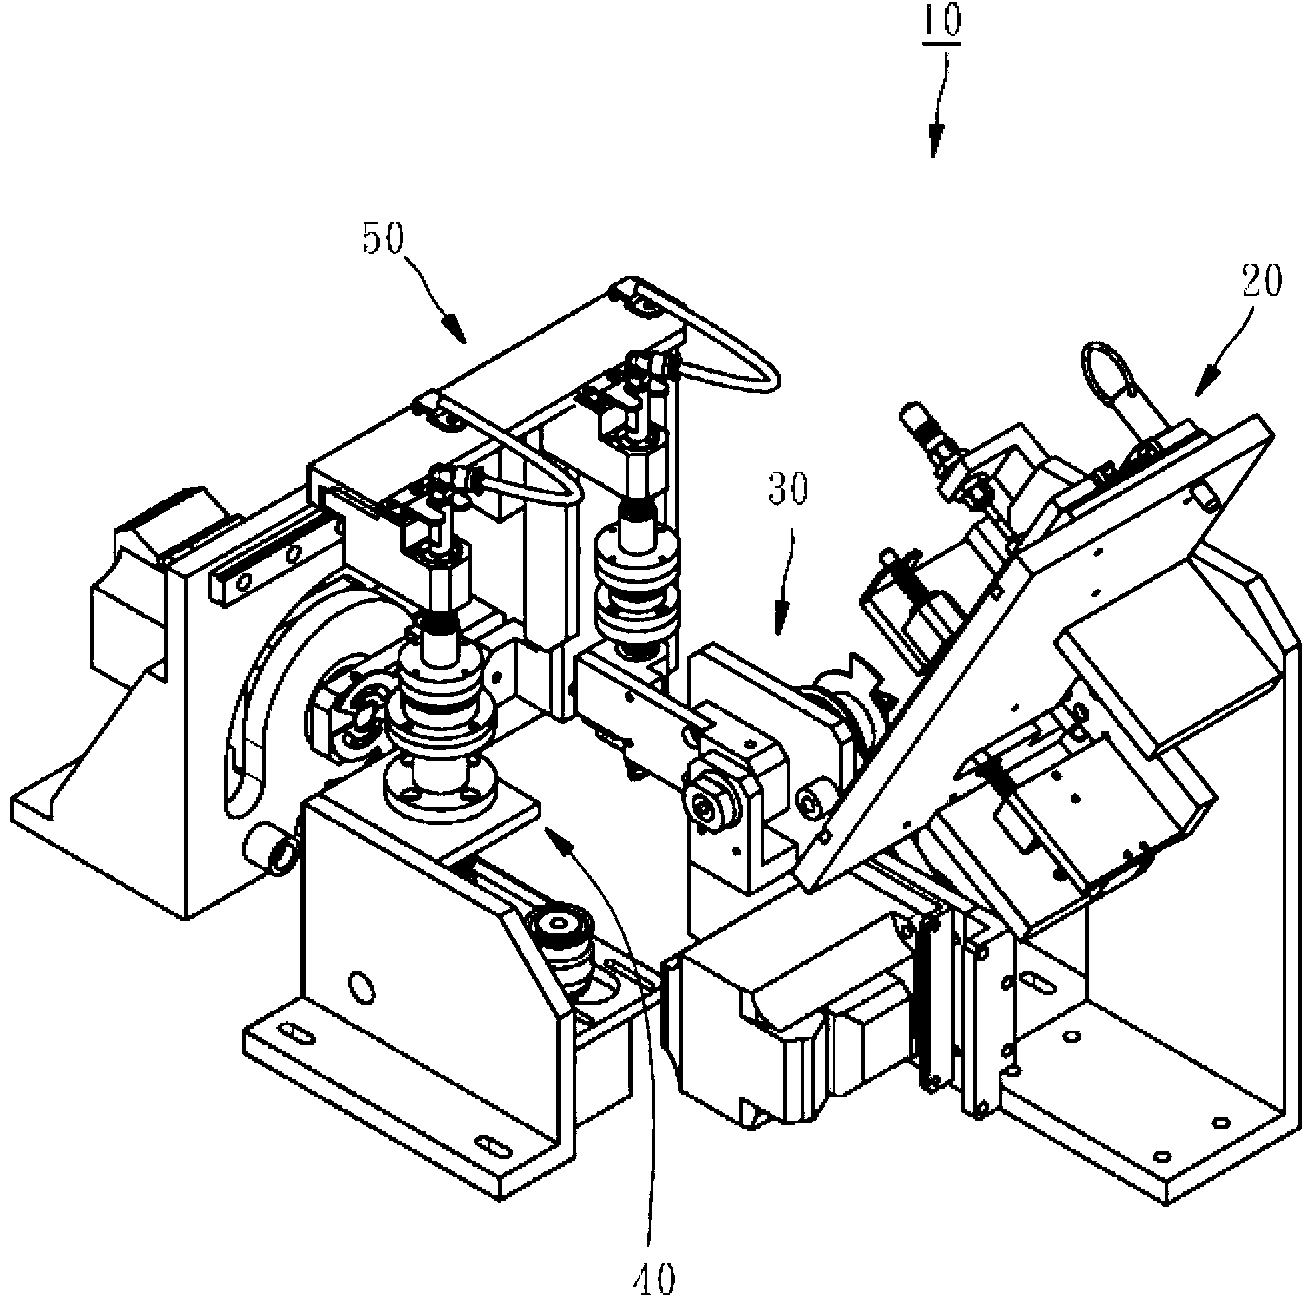 A feed mechanism for an optoelectronic component testing machine